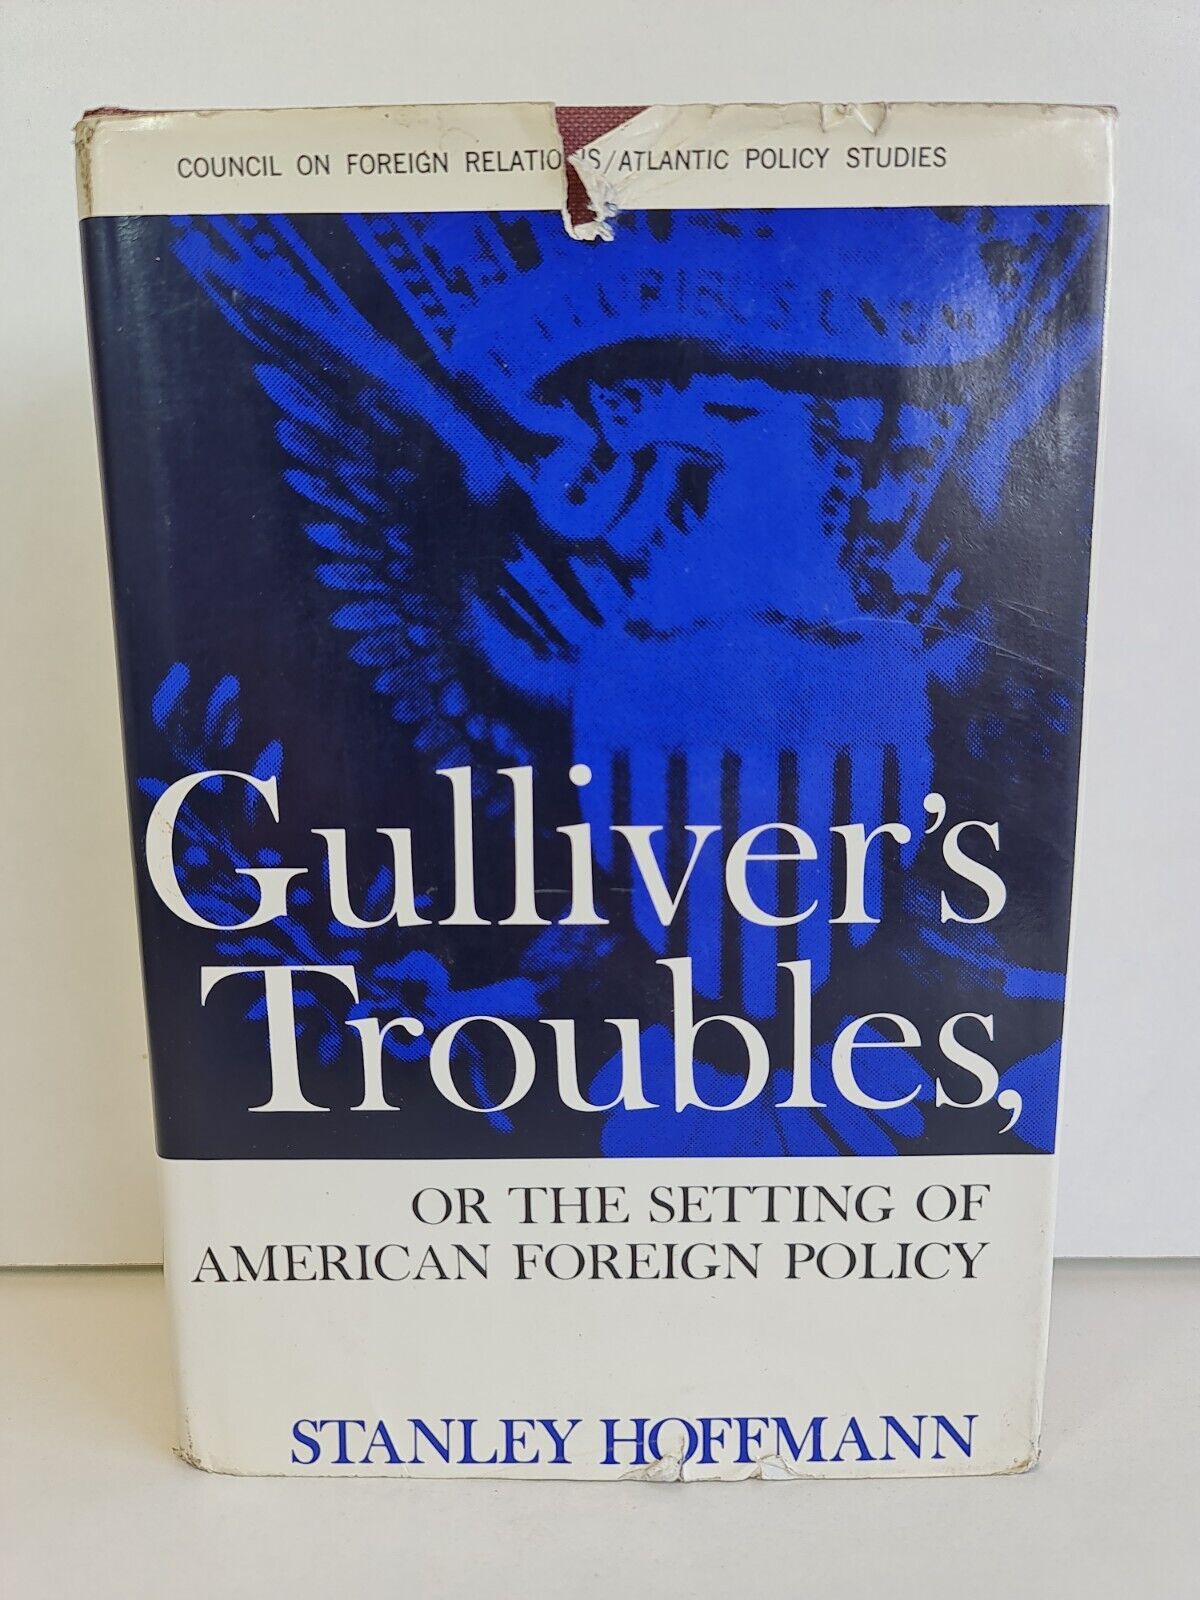 Gulliver's Troubles by Stanley Hoffmann (1968)